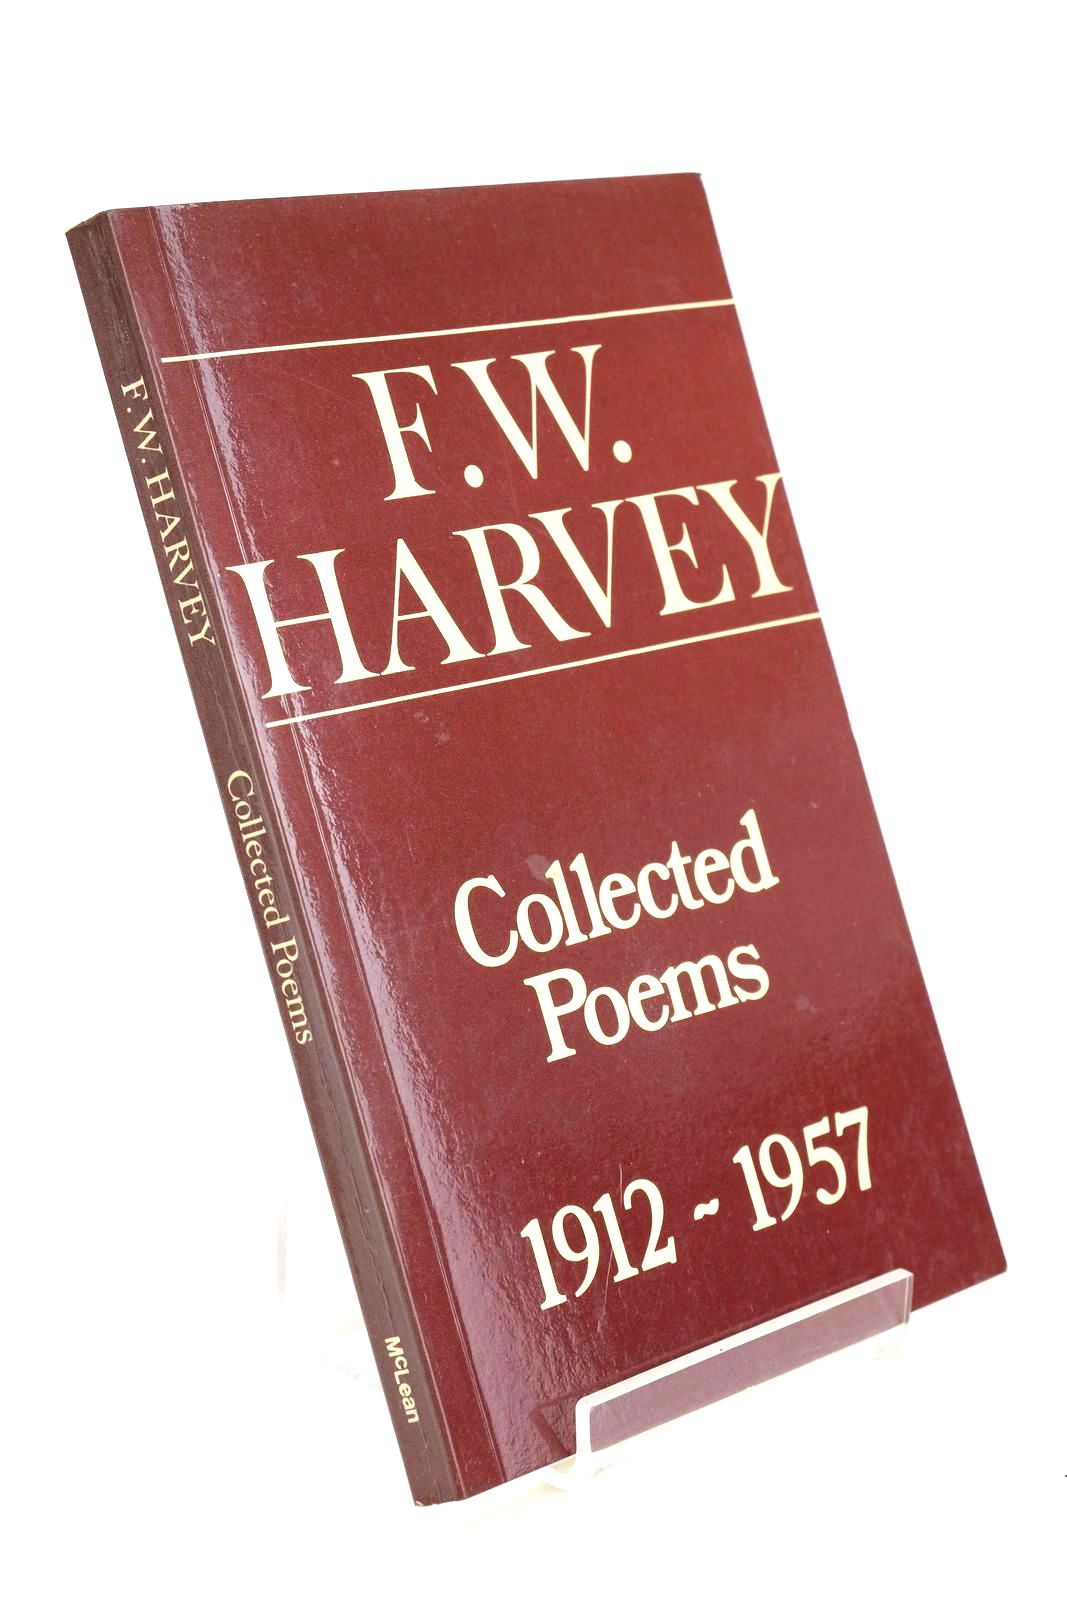 Photo of COLLECTED POEMS 1912-1957 written by Harvey, F.W. published by Douglas Mclean Publishing, The Forest Bookshop (STOCK CODE: 1326790)  for sale by Stella & Rose's Books